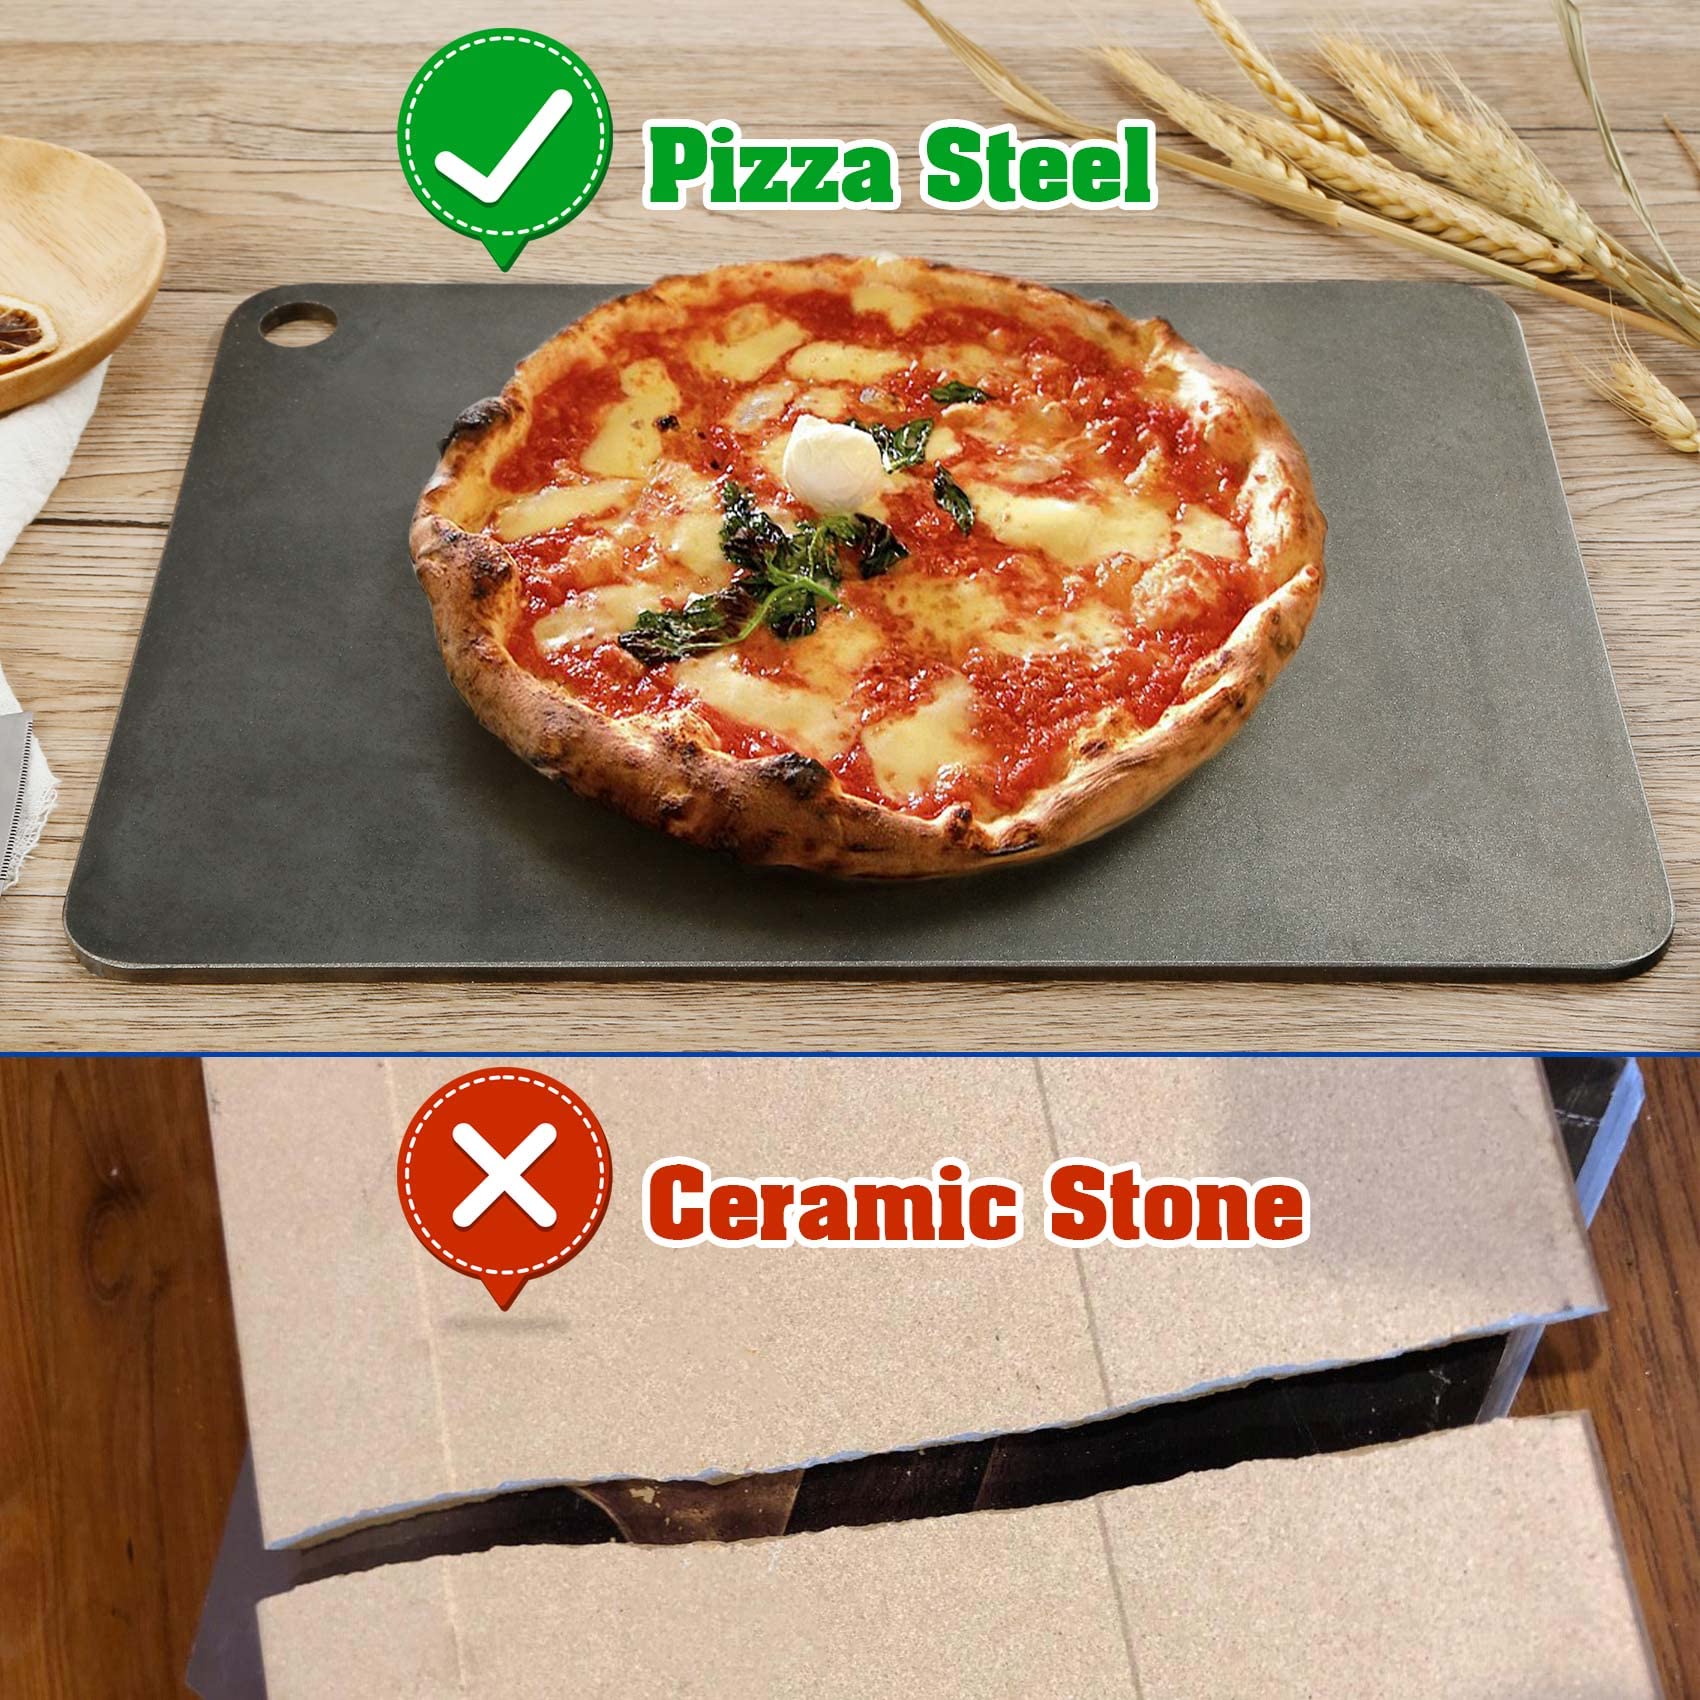 TCFUNDY Pizza Steel for Oven 2PCS, Steel Pizza Stone for Grill and Oven, Pre-Seasoned Solid Carbon Steel Non-Stick Pizza Pans, Combine into 13.5